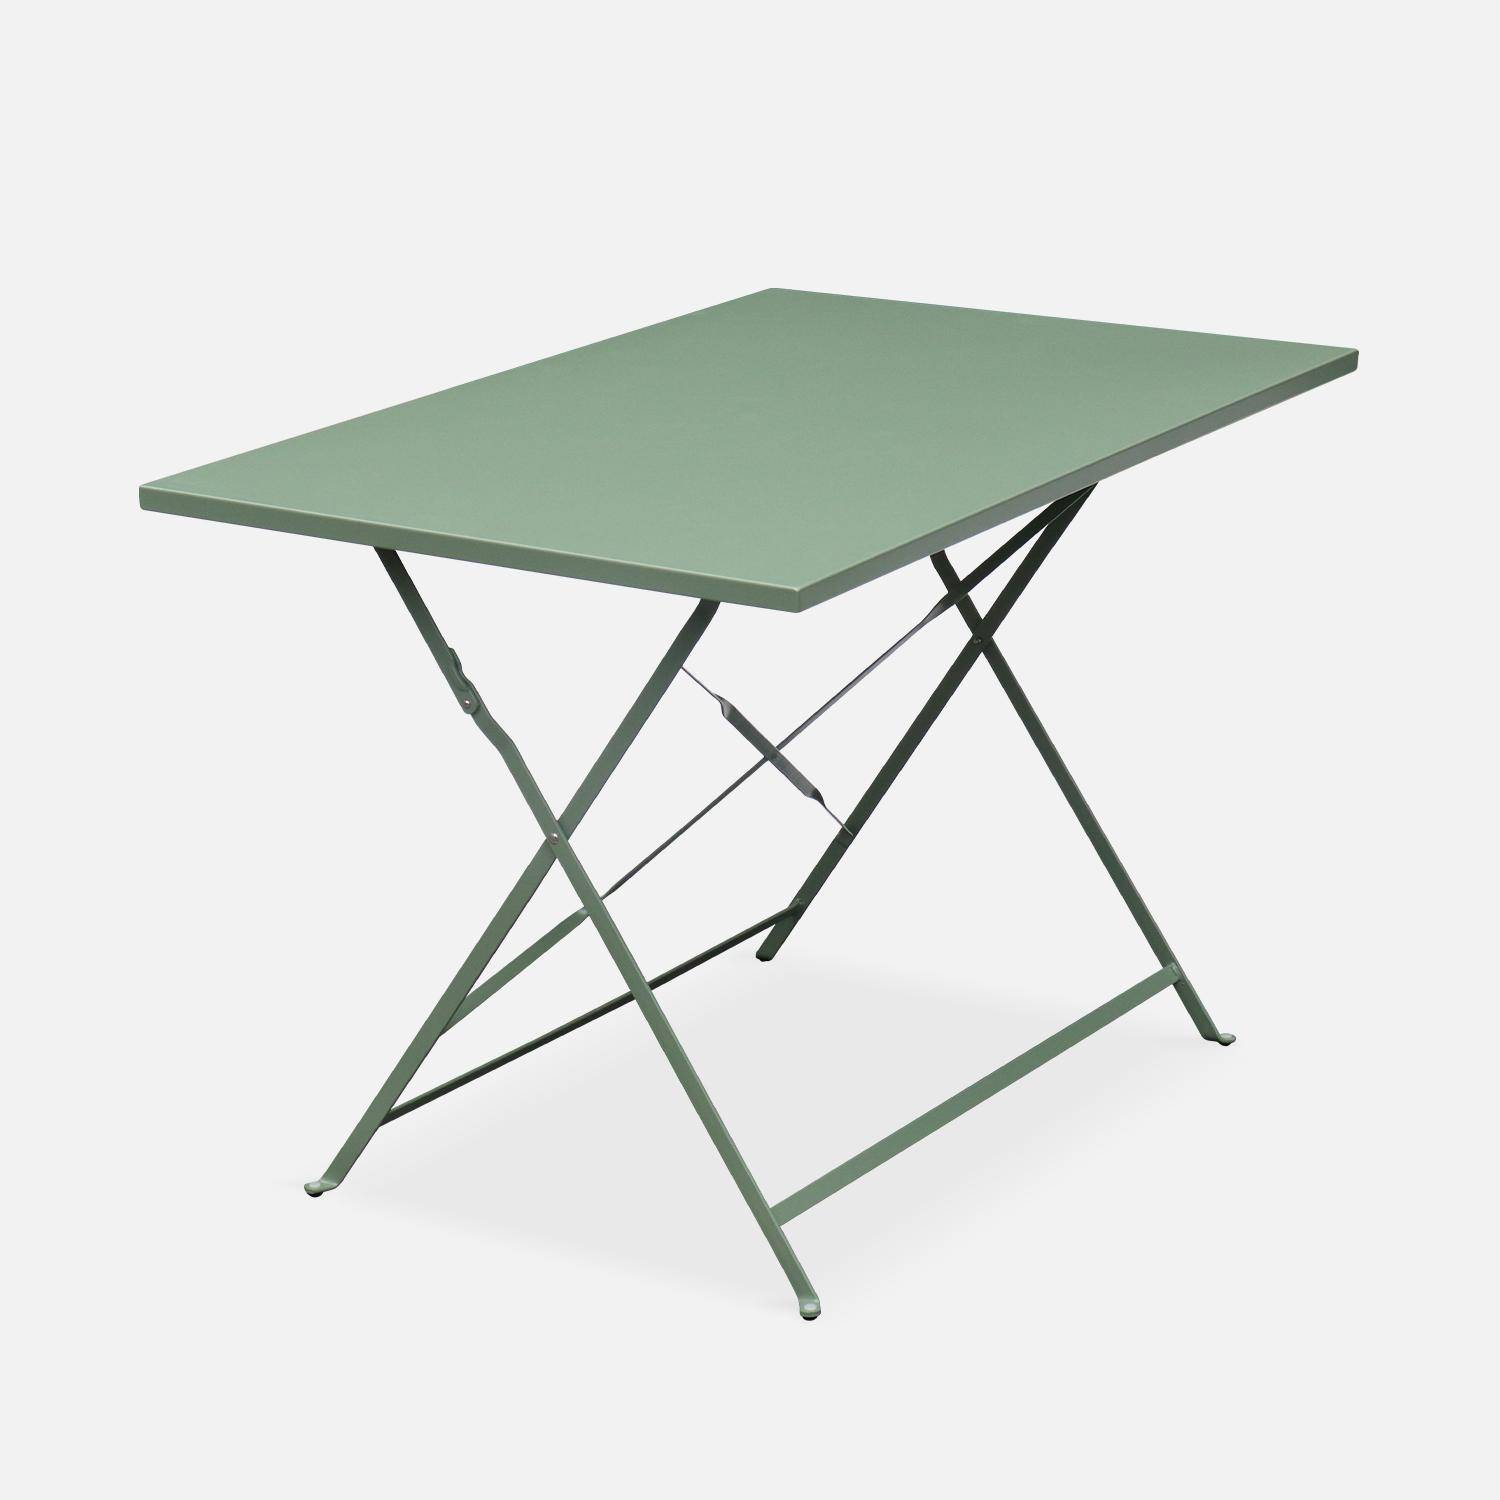 4-seater foldable thermo-lacquered steel bistro garden table with chairs, 110x70cm - Emilia - Sage green,sweeek,Photo3